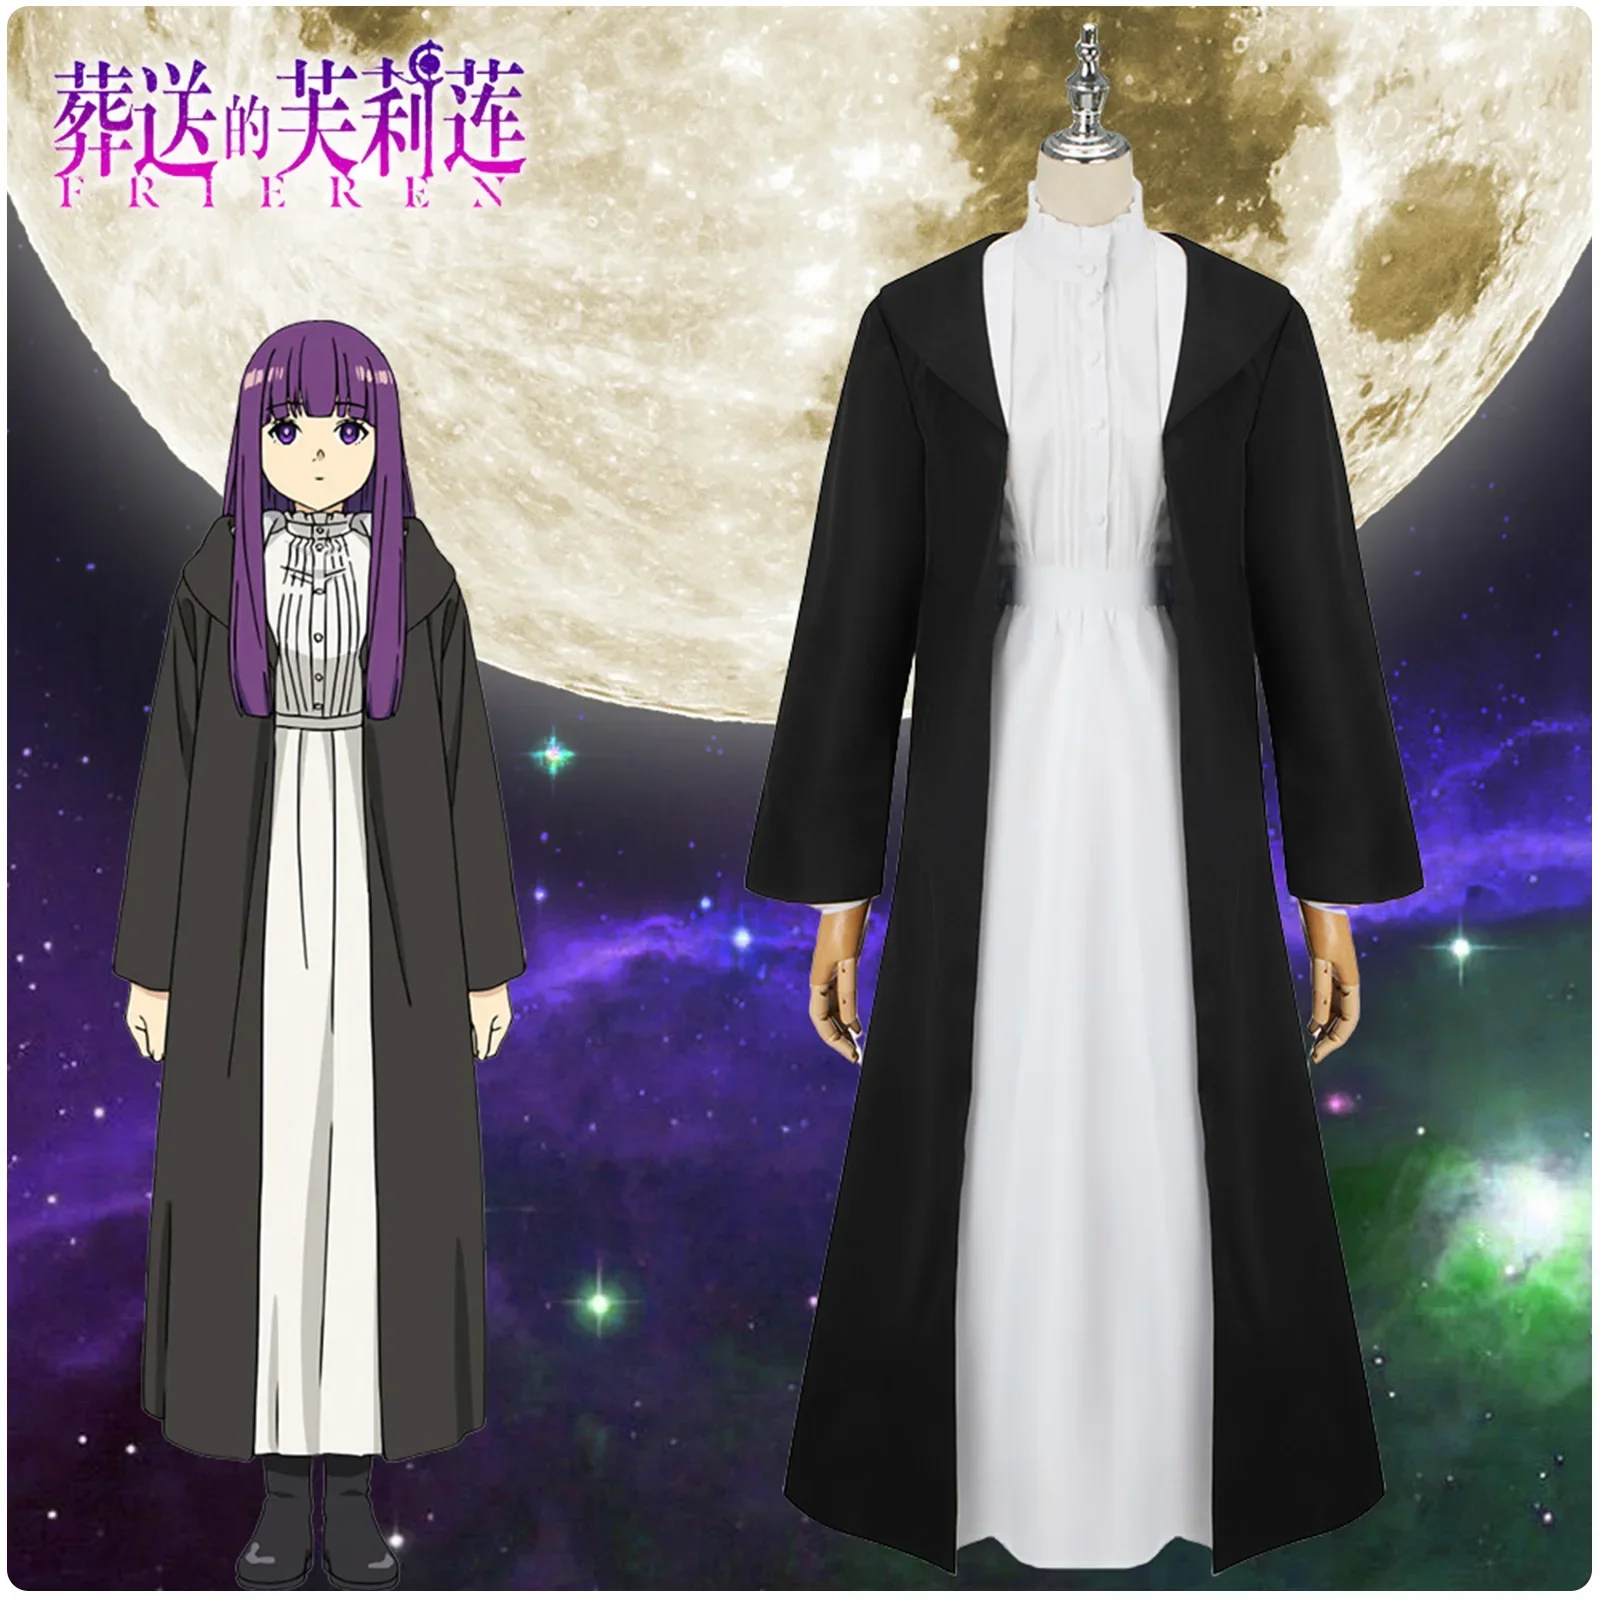 

Frieren At The Funeral Anime Fren Cosplay Costume Wig Cloak Dress Beyond Journey's End Christmas Gift Halloween Party Outfit